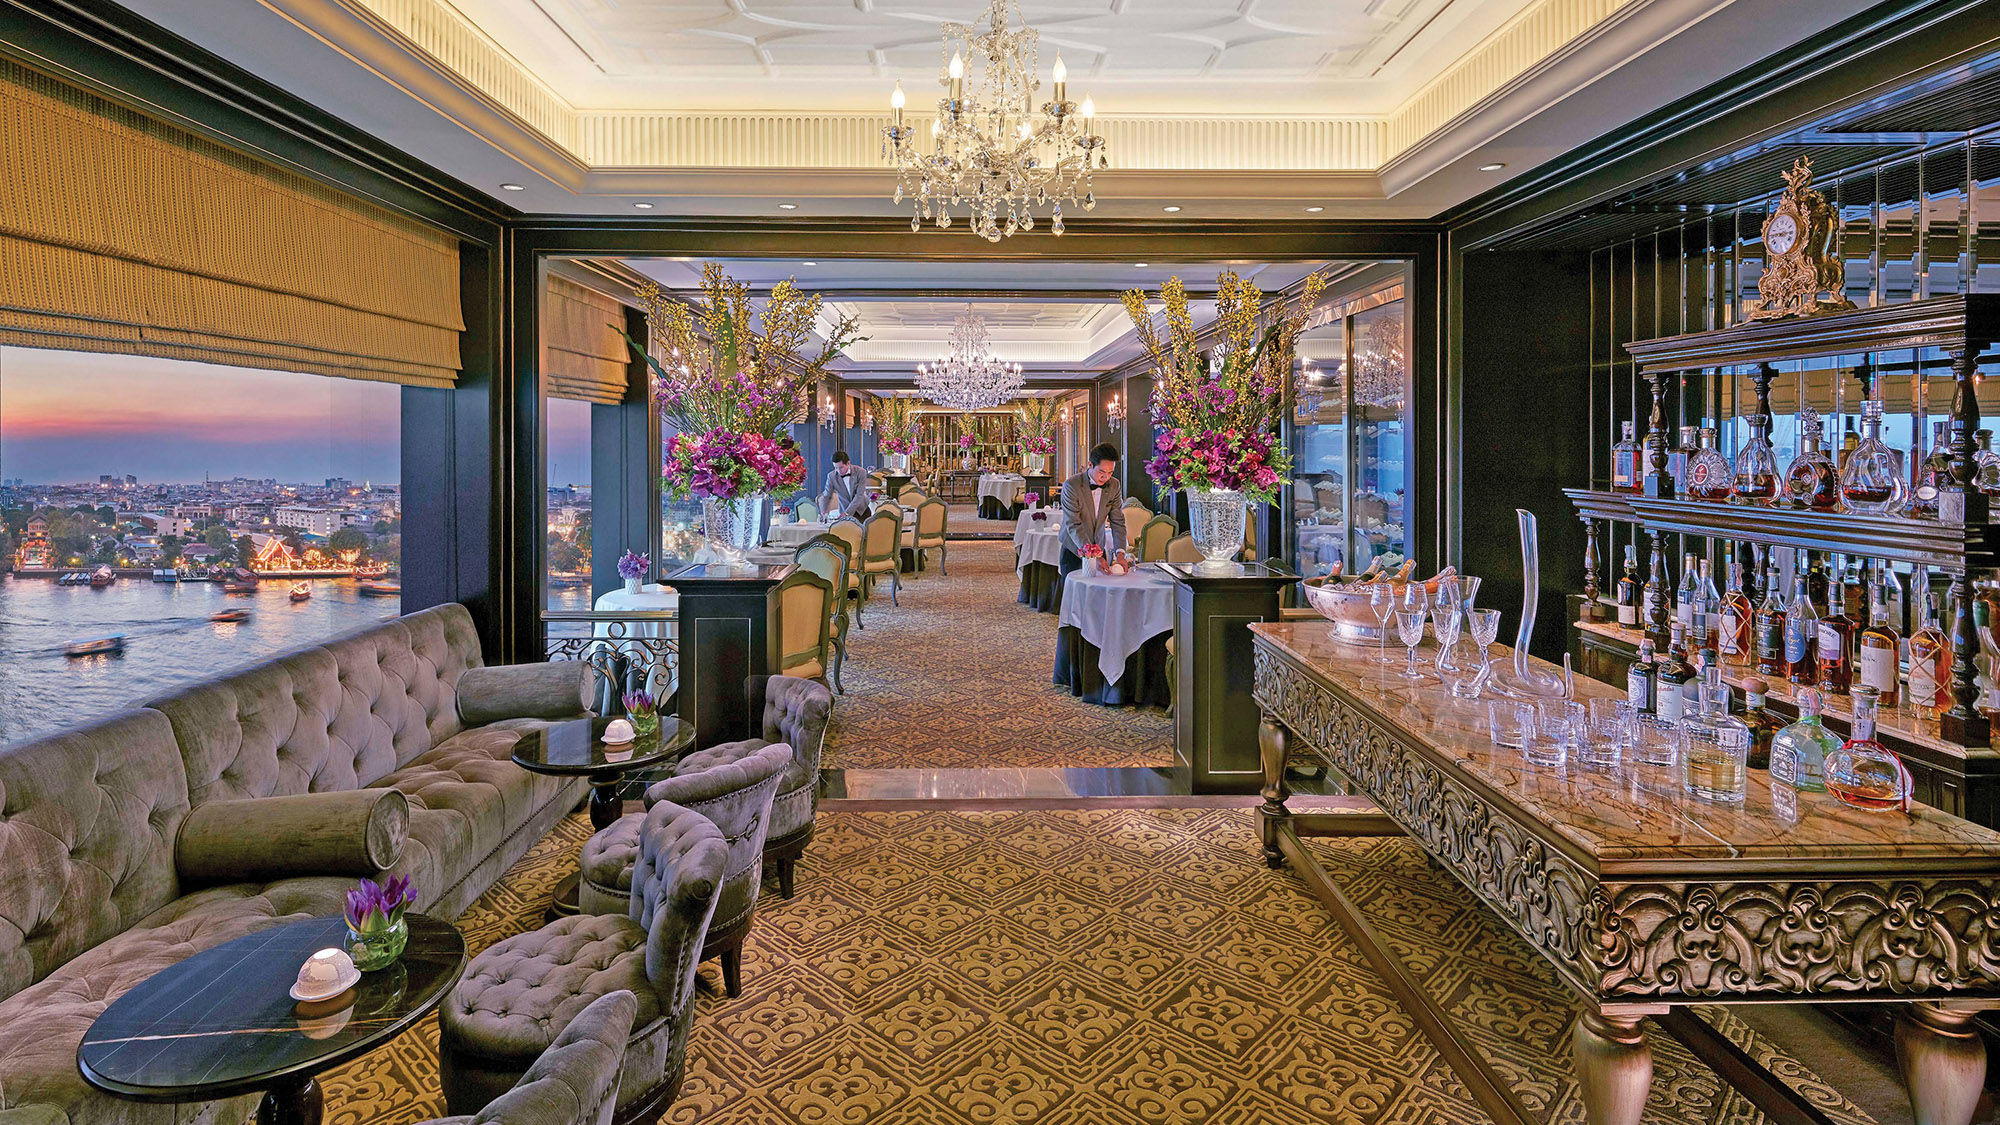 The hotel's Le Normandie restaurant has been awarded two Michelin stars.